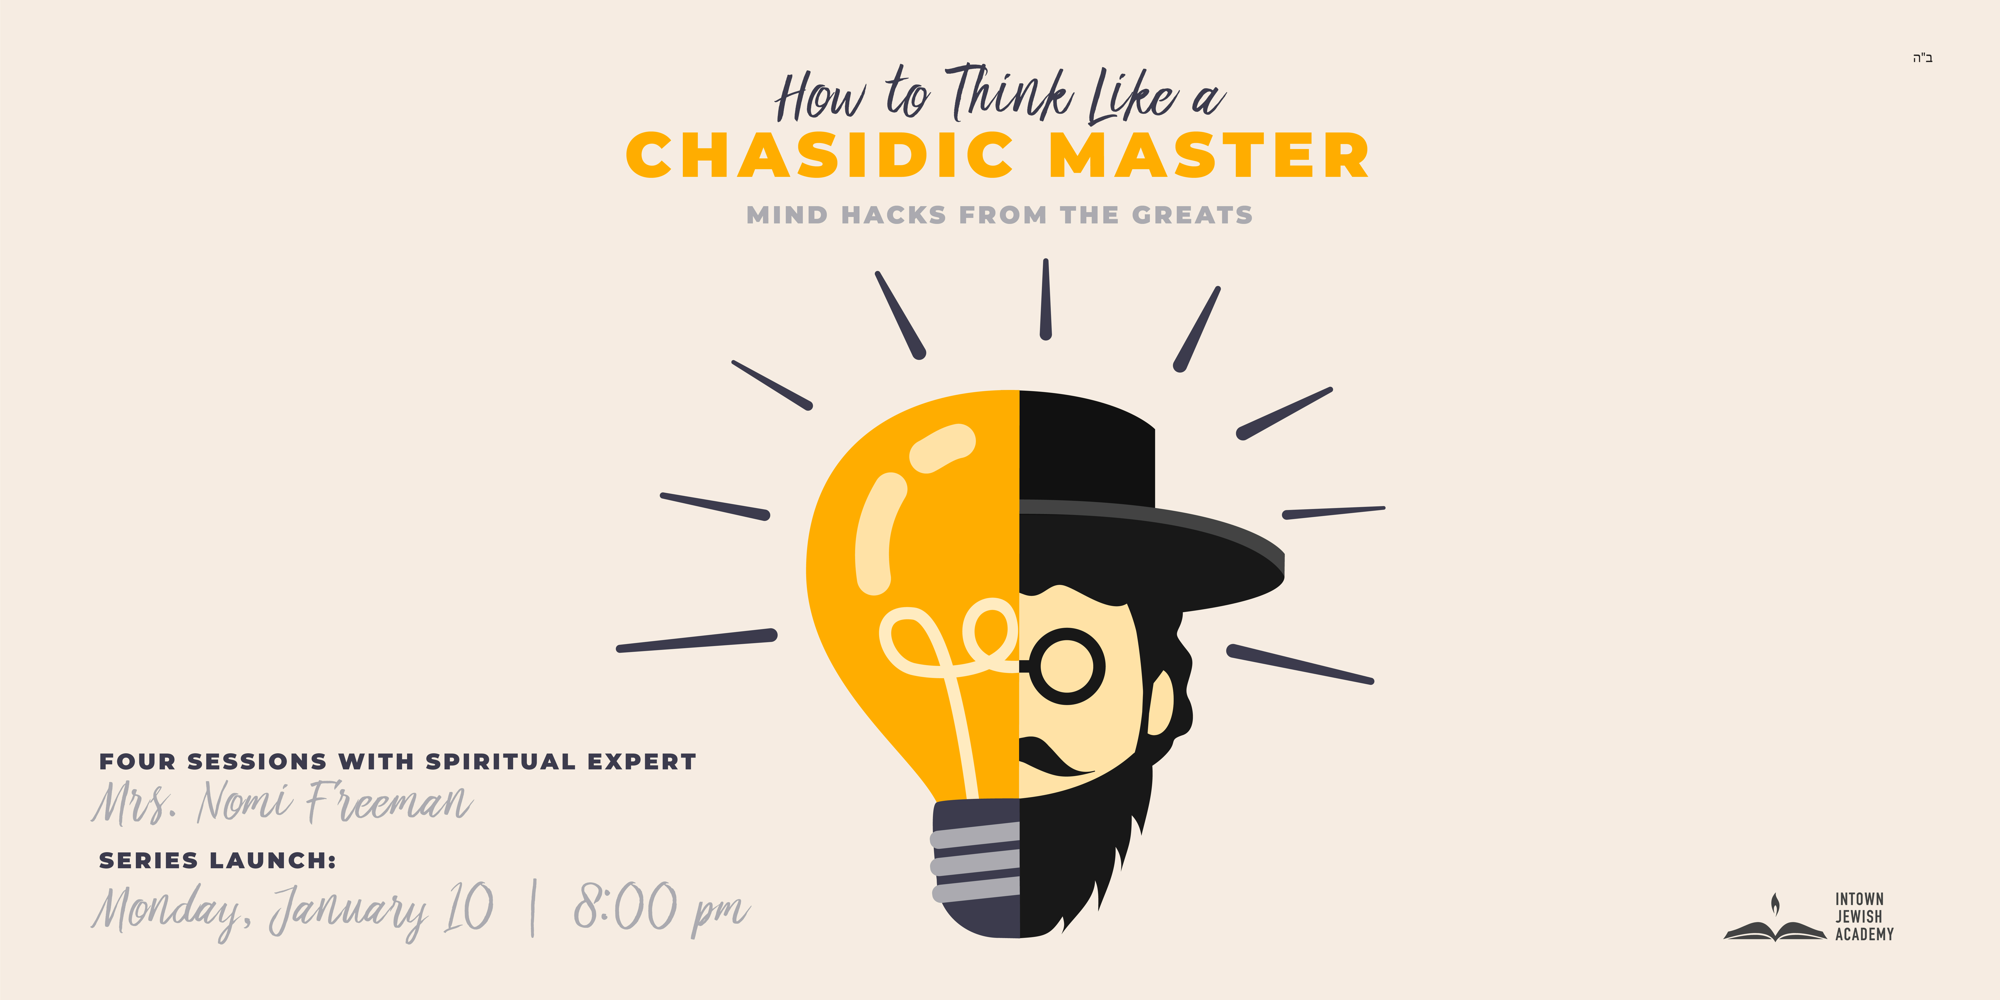 How to Think Like a Chasidic Master promotional image